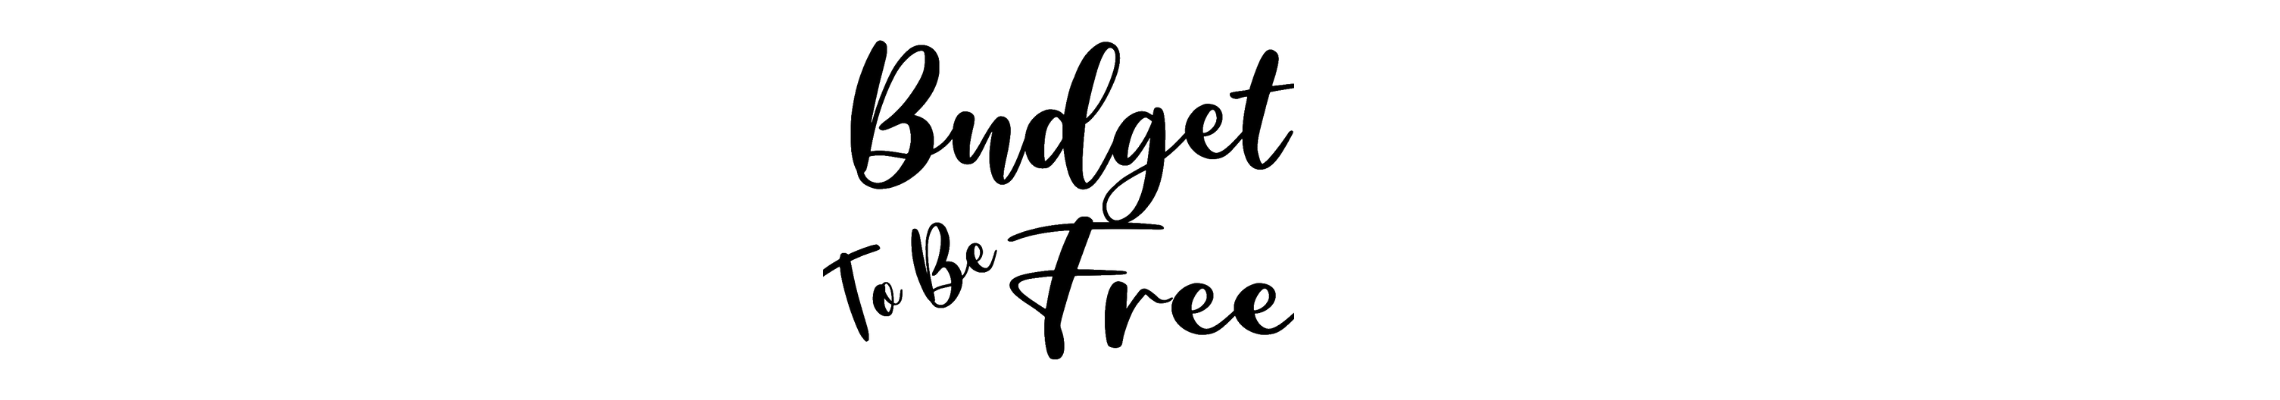 Budget to be Free